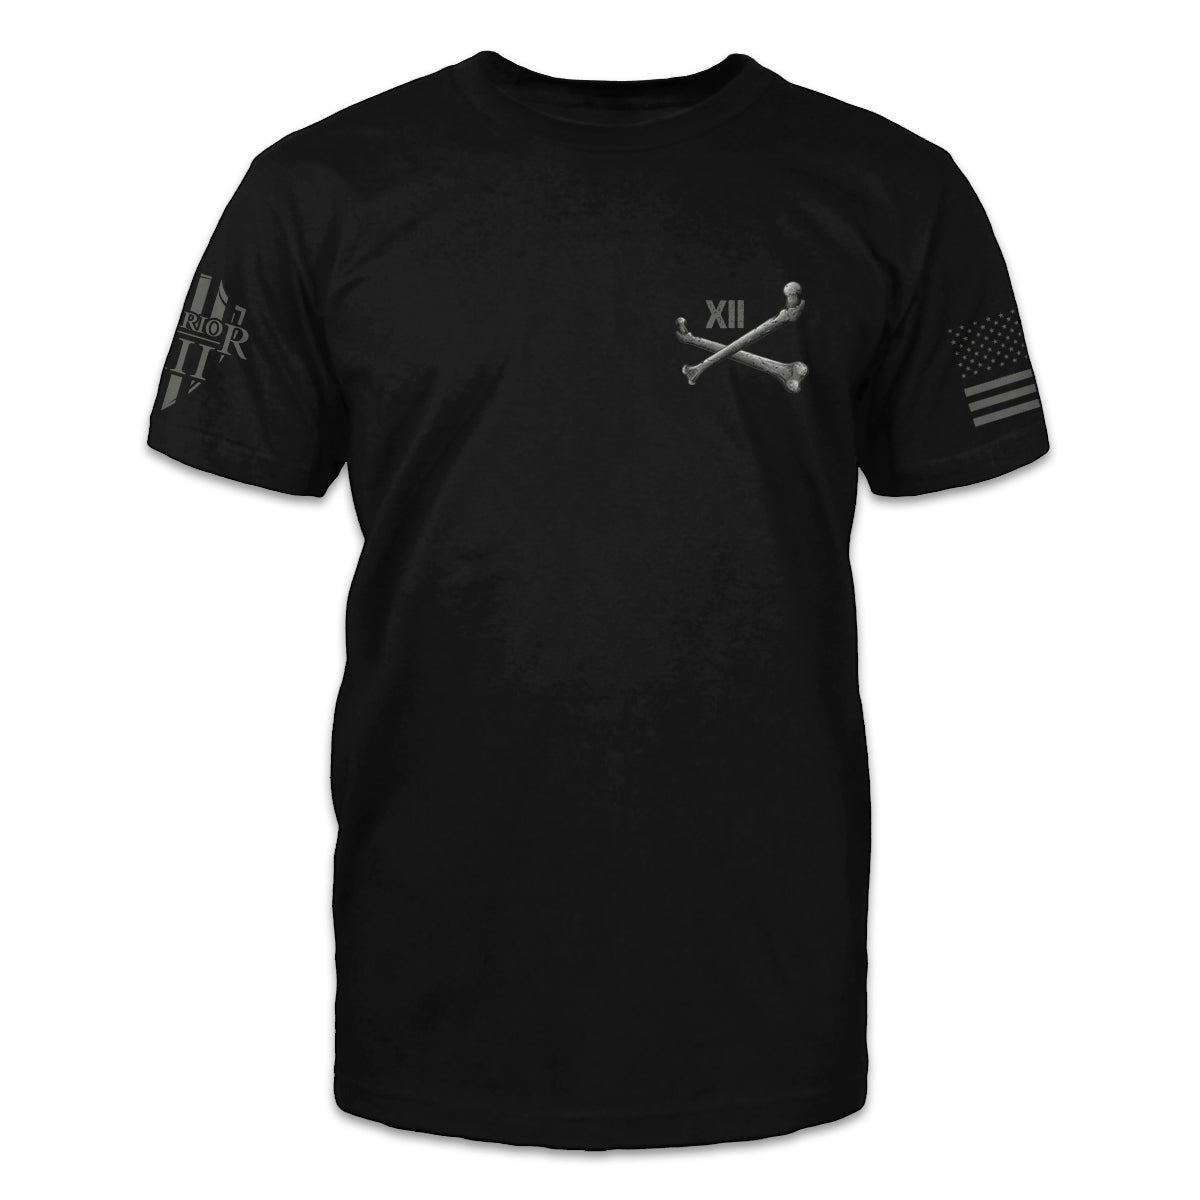 The front of  black t-shirt featuring a pocket image of crossbones with an XII.